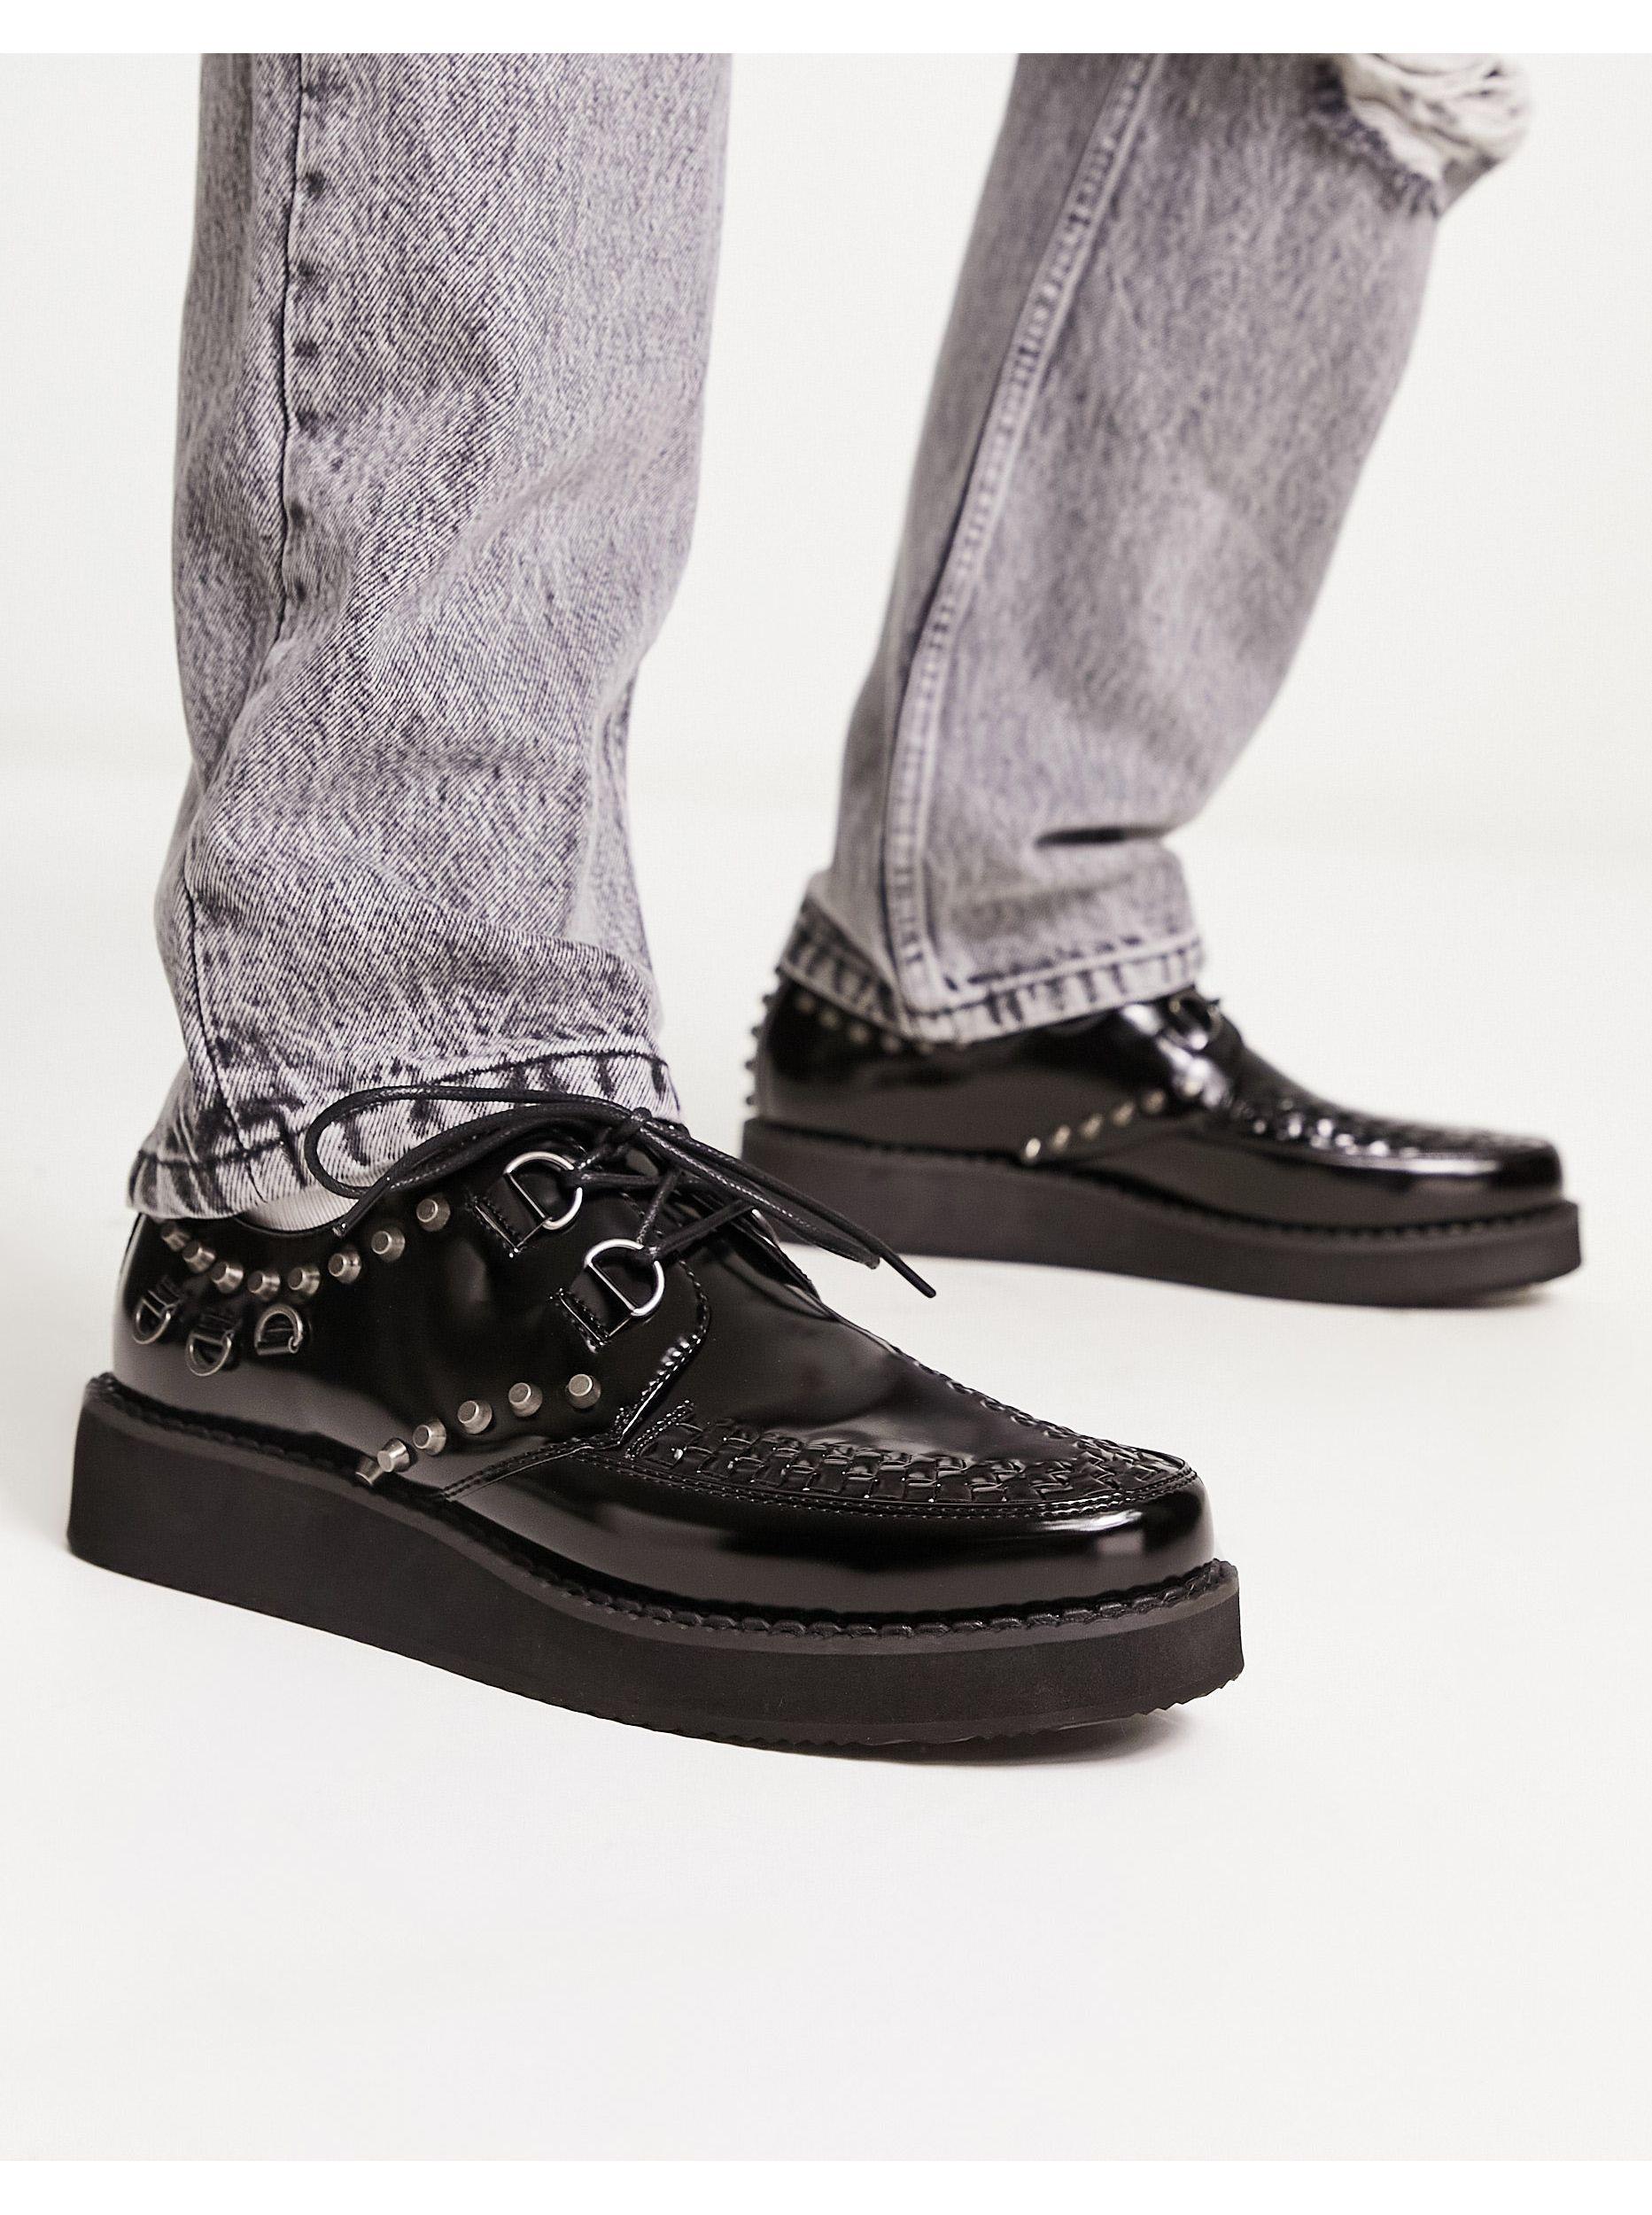 Marty Fielding boom haat ASOS Chunky Sole Creeper Shoes With Eyelet Detail in Black for Men | Lyst